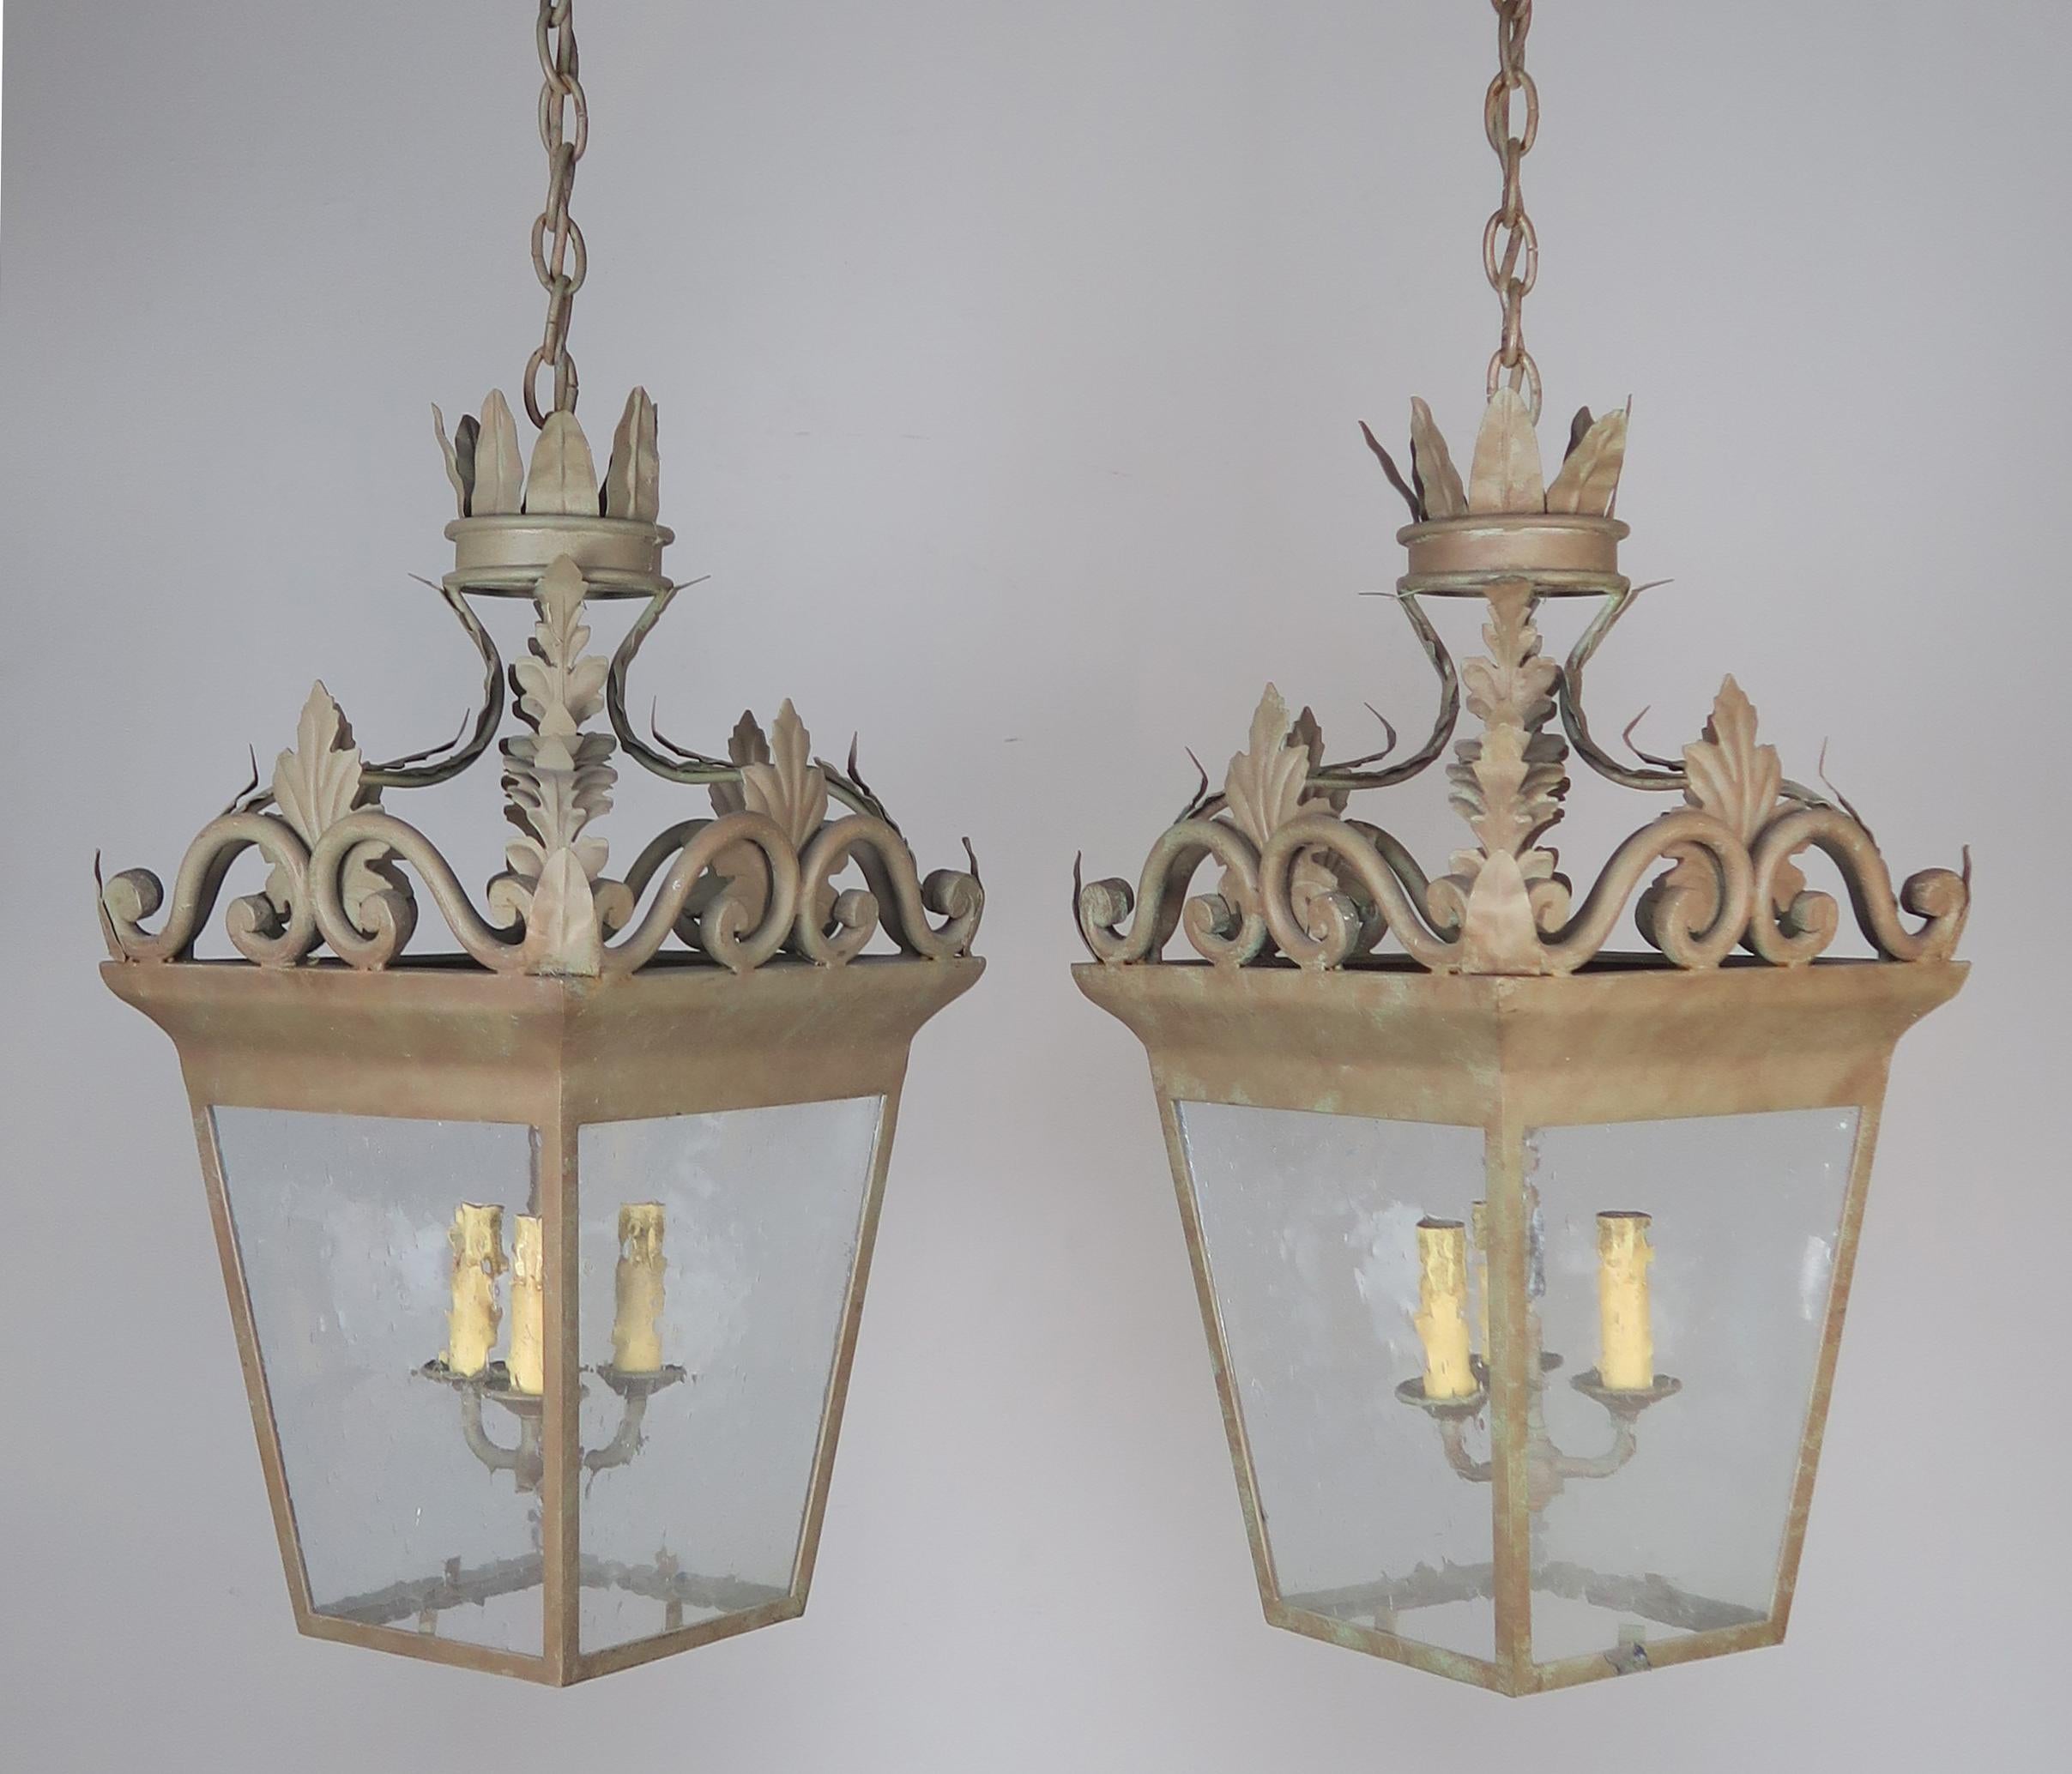 Pair of Spanish hand-wrought iron three-light lanterns with crown detail at top. This pair came from a Montecito home near Santa Barbara, California. The lanterns have the original pitted glass. Newly rewired including chain and canopy and ready to